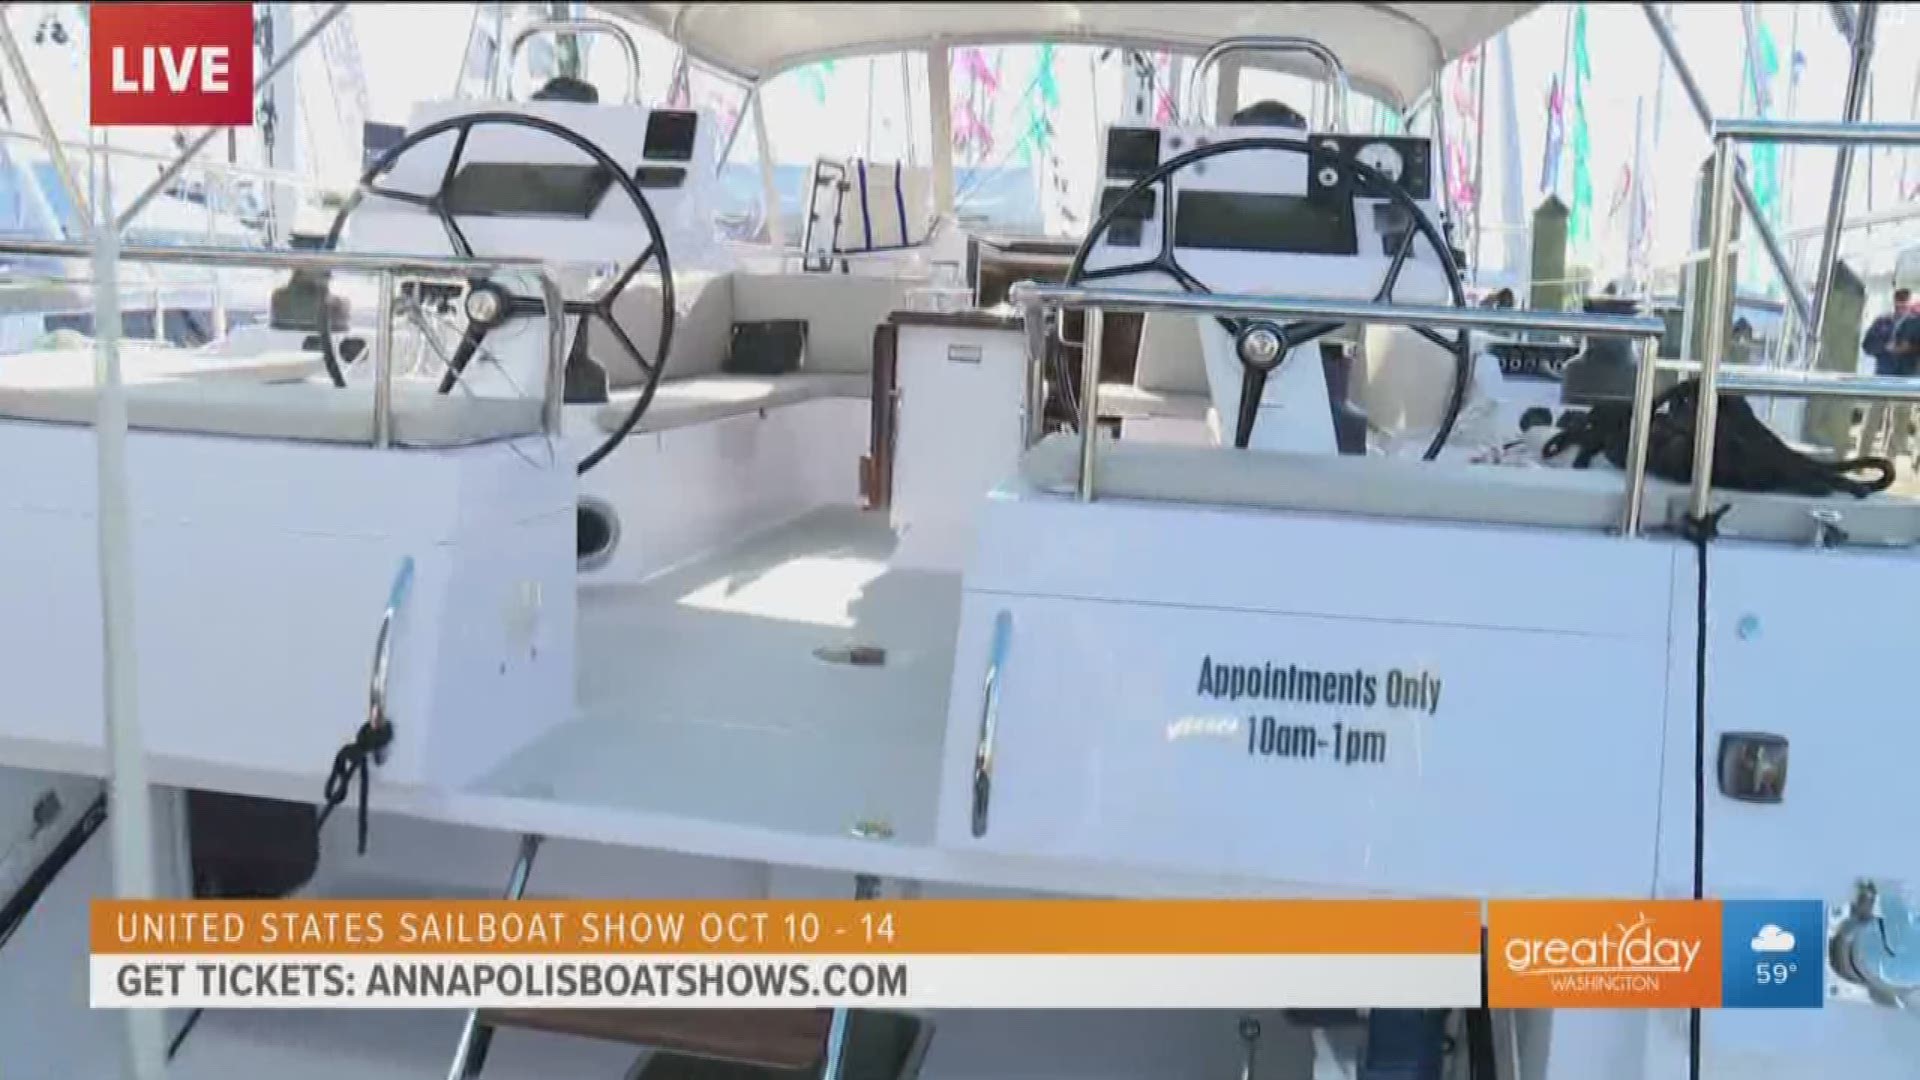 Explore new sailboats and the sailing lifestyle at the 50th annual United States Sailboat Show. This segment was sponsored by the Annapolis Boat Shows.